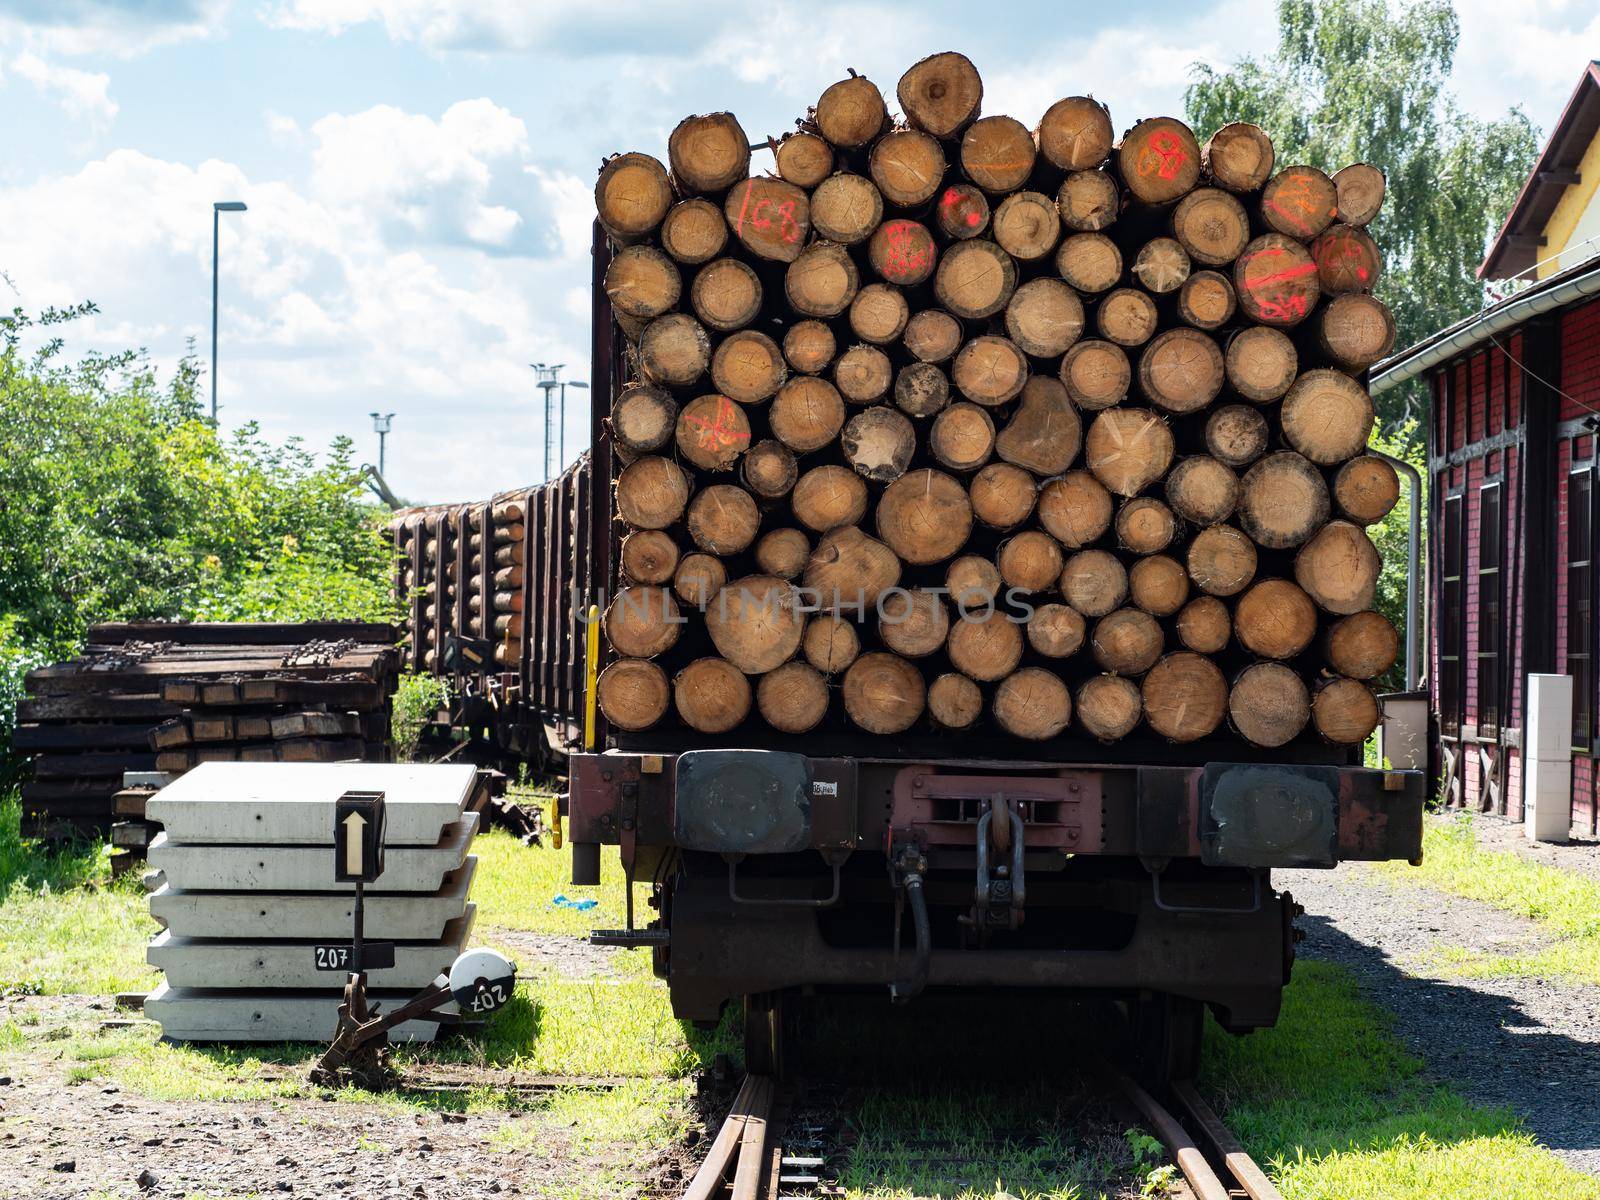 Timber transport by trail by railways. The train car stands in a depot near the switch.